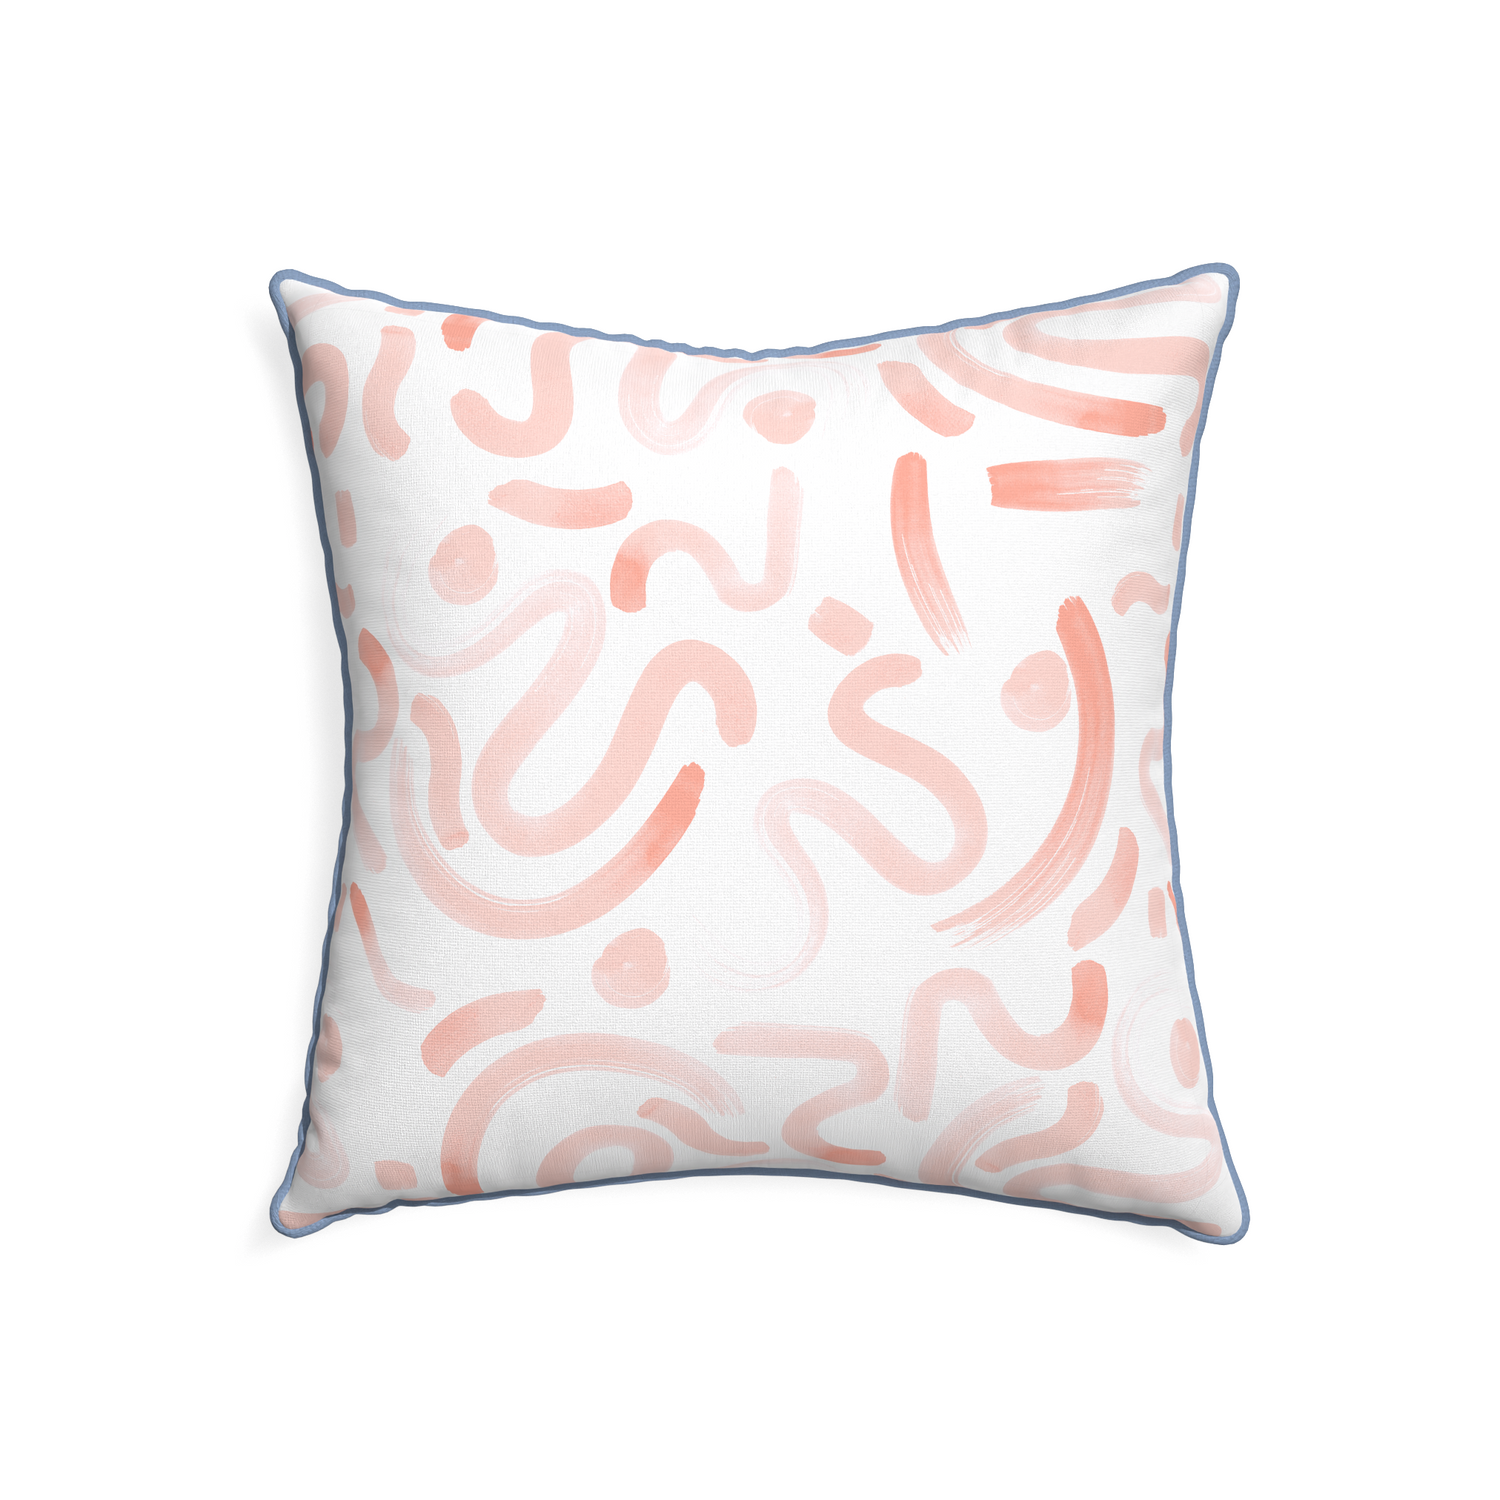 22-square hockney pink custom pink graphicpillow with sky piping on white background